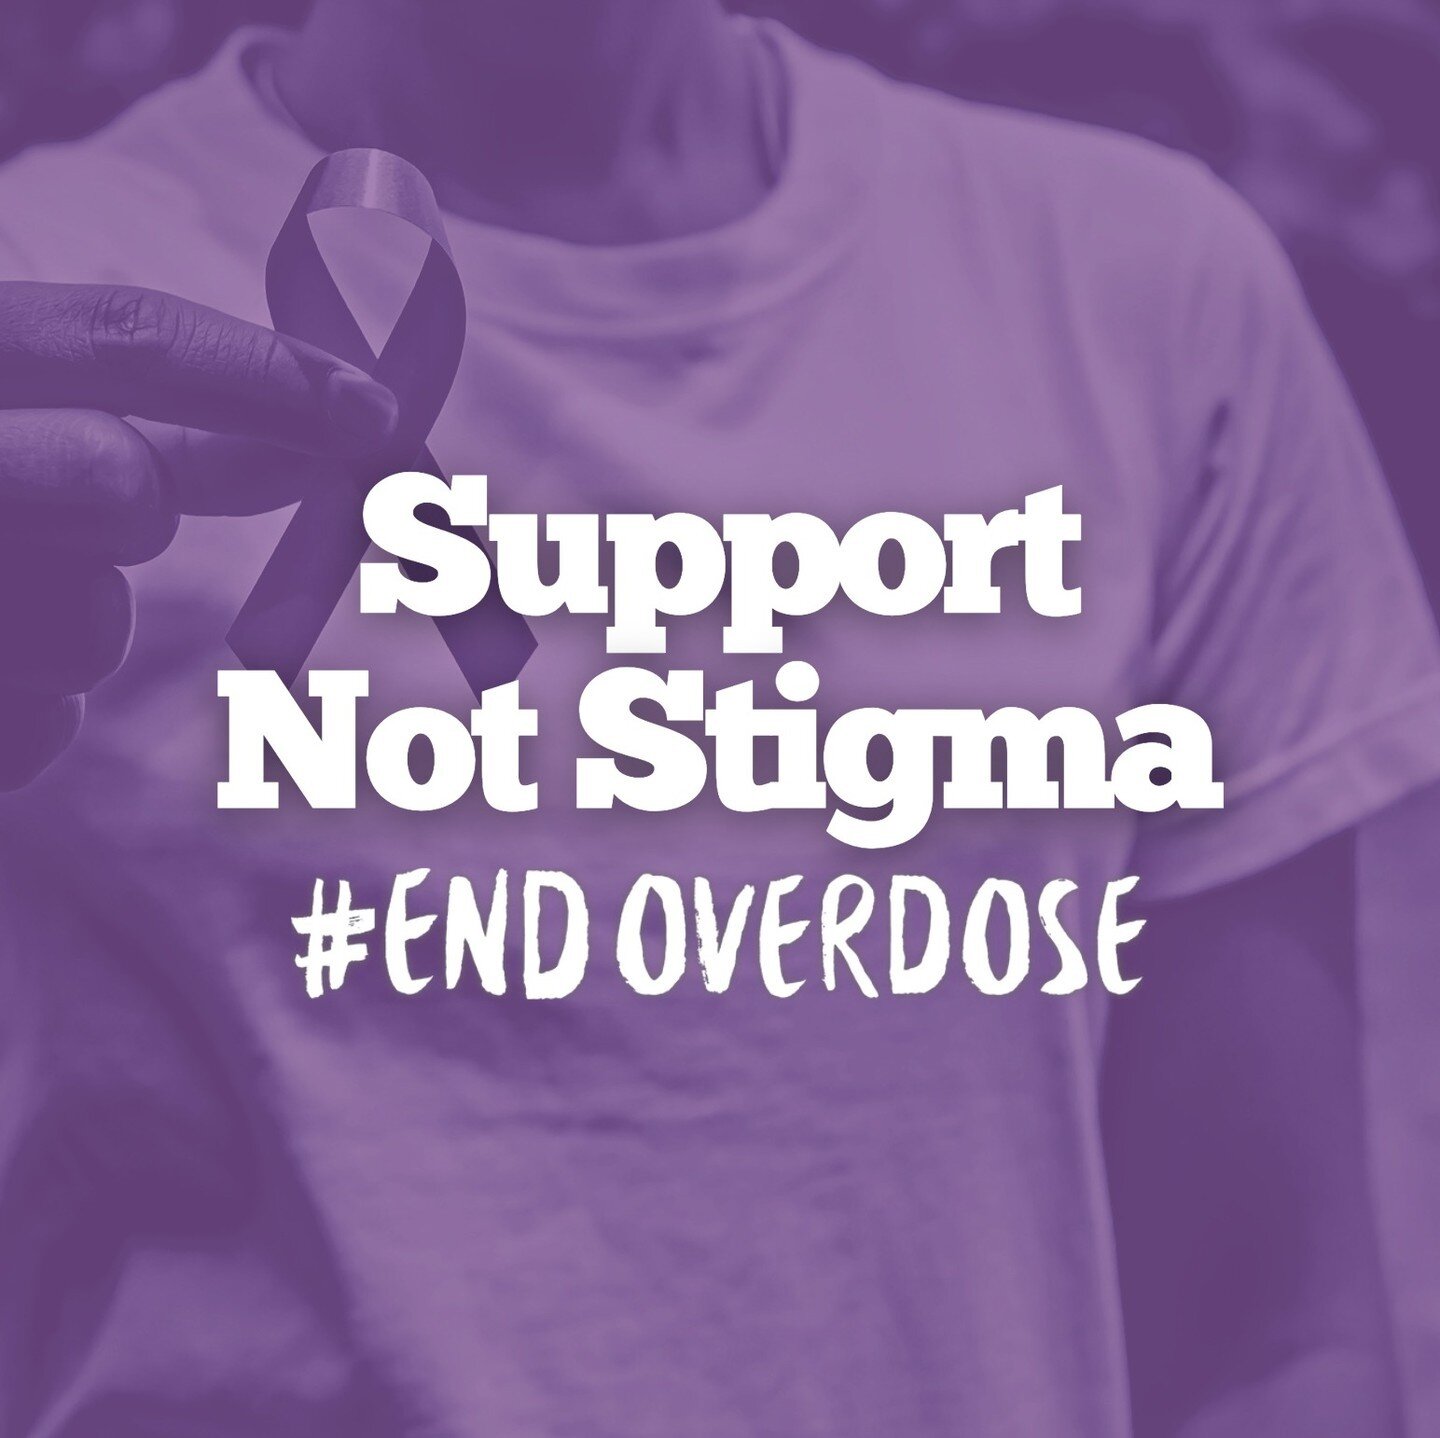 Today, over 400 events will take place in over a dozen countries around the world in honour of International Overdose Awareness Day.⁠
⁠
A large part of #IOAD is providing the opportunity for people to publicly mourn loved ones in a safe environment, 